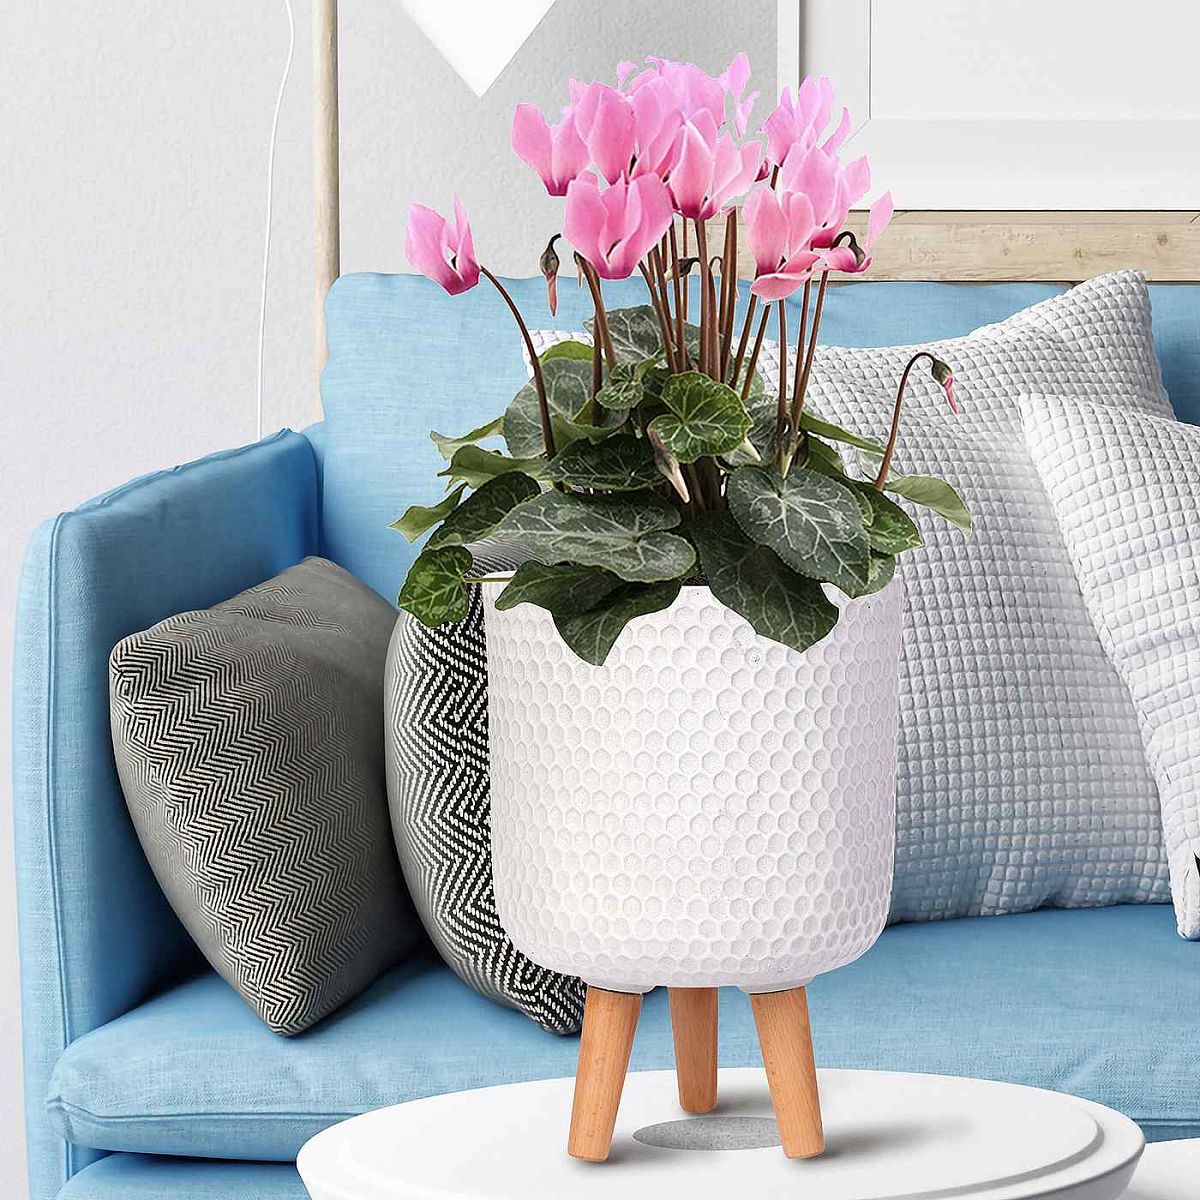 Honeycomb Style Cylinder Planter on Legs, Round Pot Plant Stand Indoor by Idealist Lite